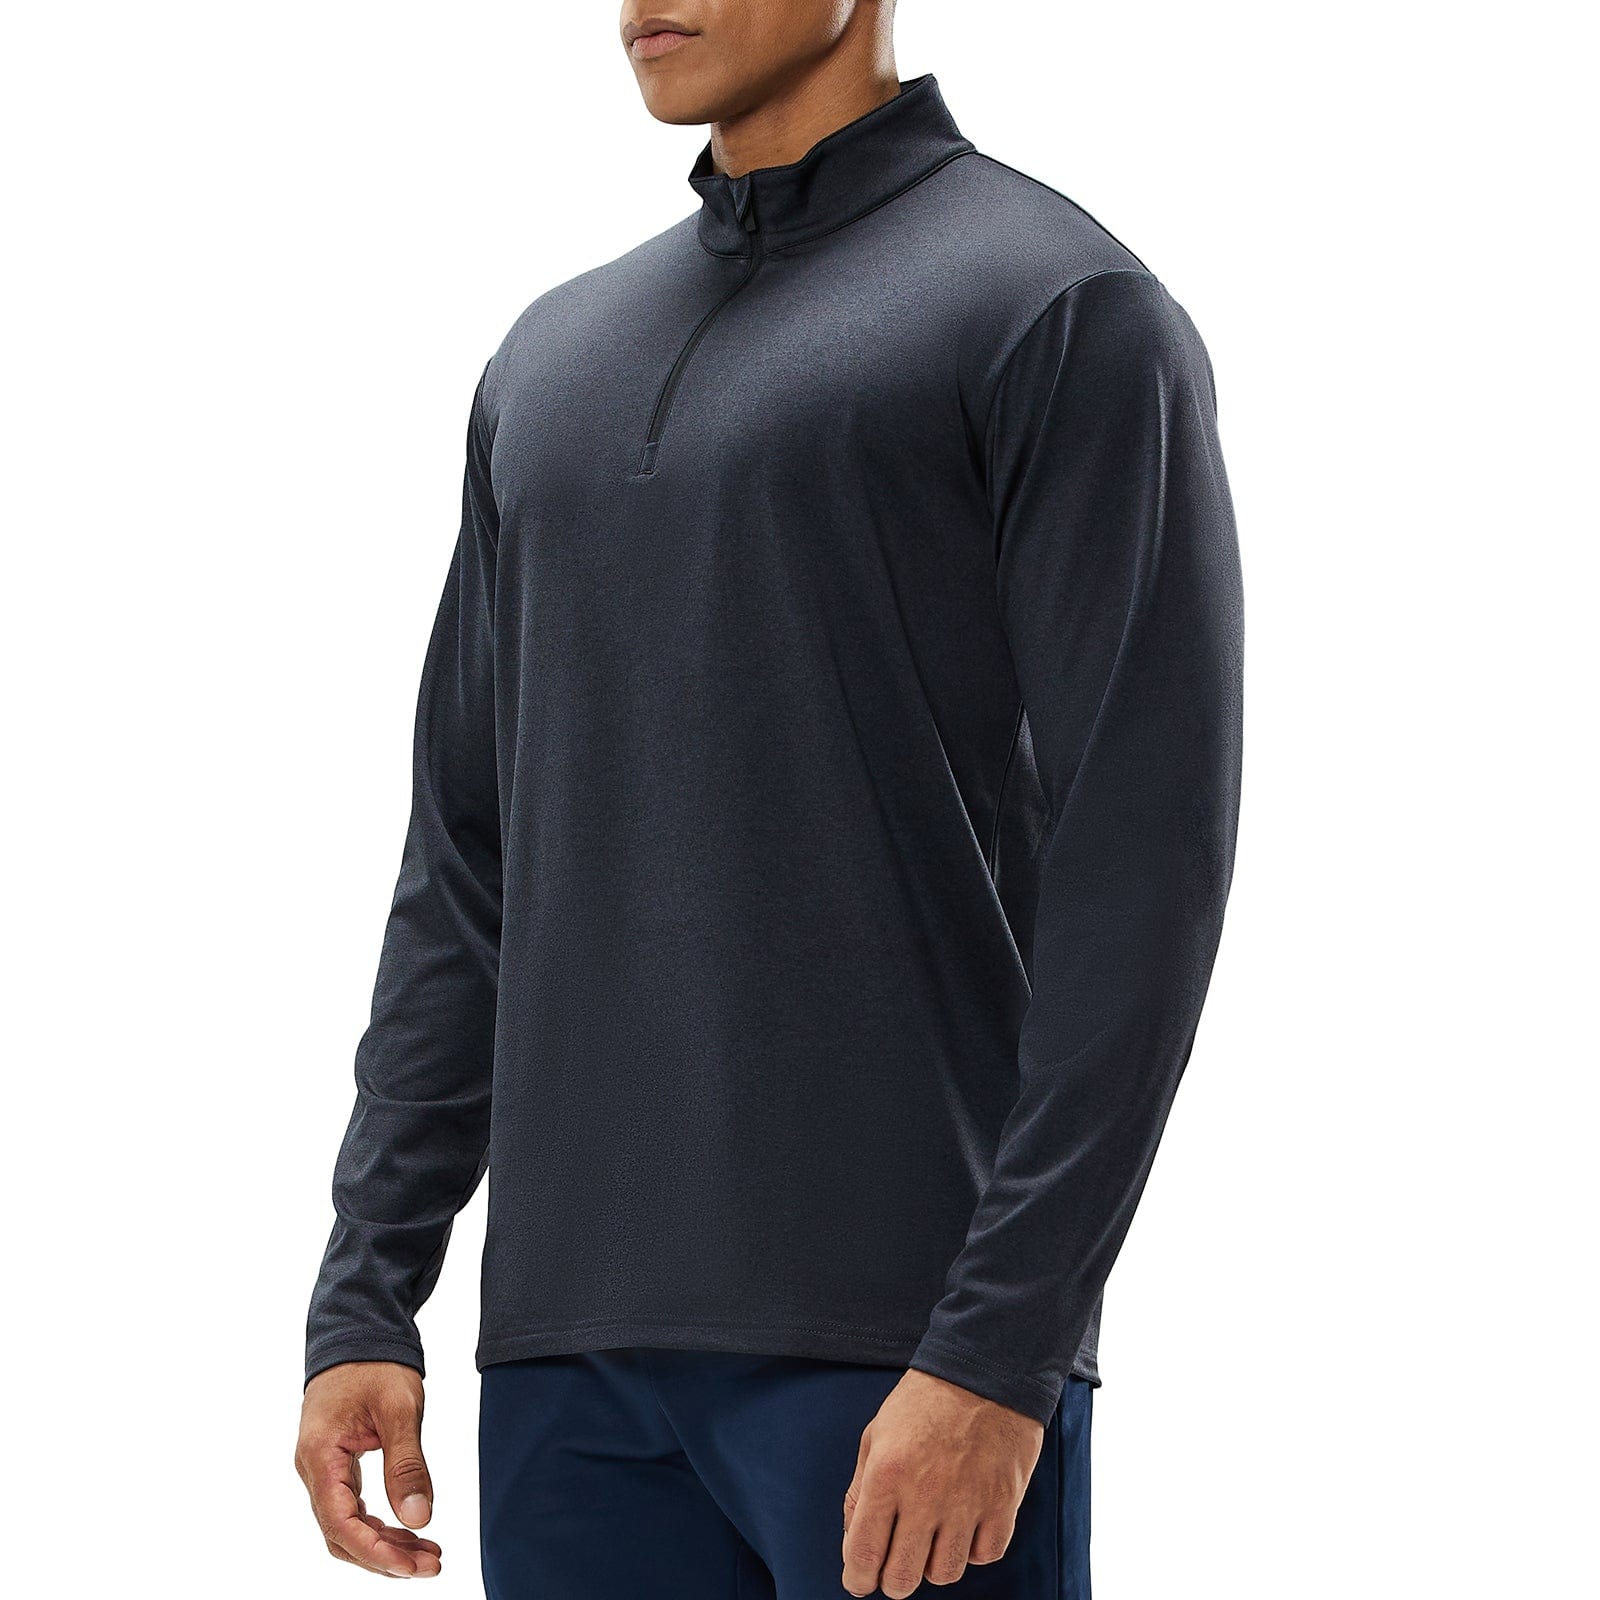 MIER Mens Quarter Zip Hiking Running Pullover Long Sleeve Collared Golf Shirts Thin Thermal Athletic Top MIER